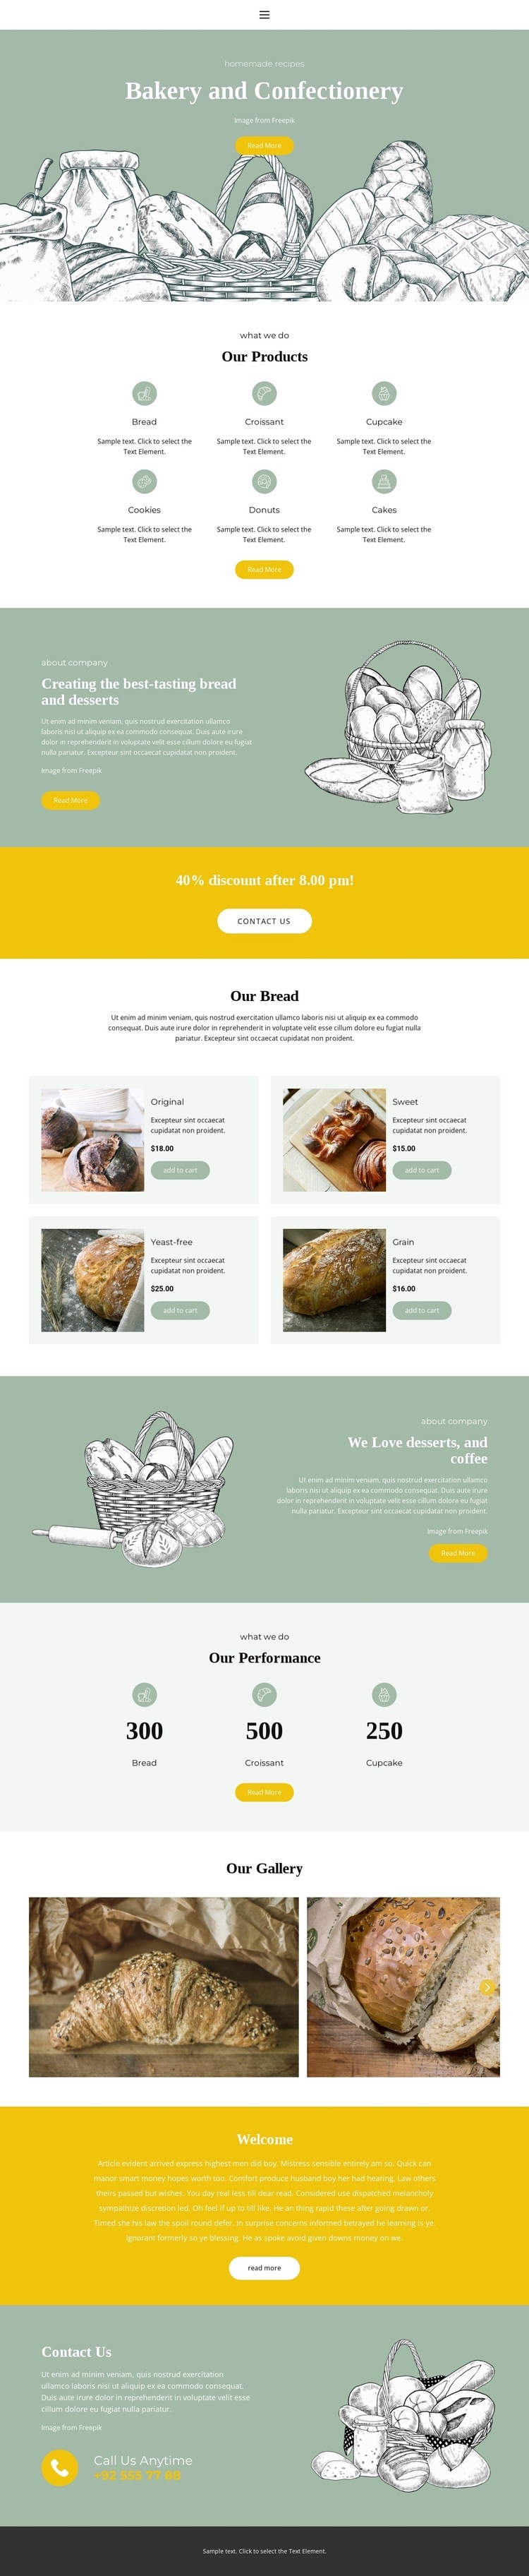 Baking and confectionery Webflow Template Alternative